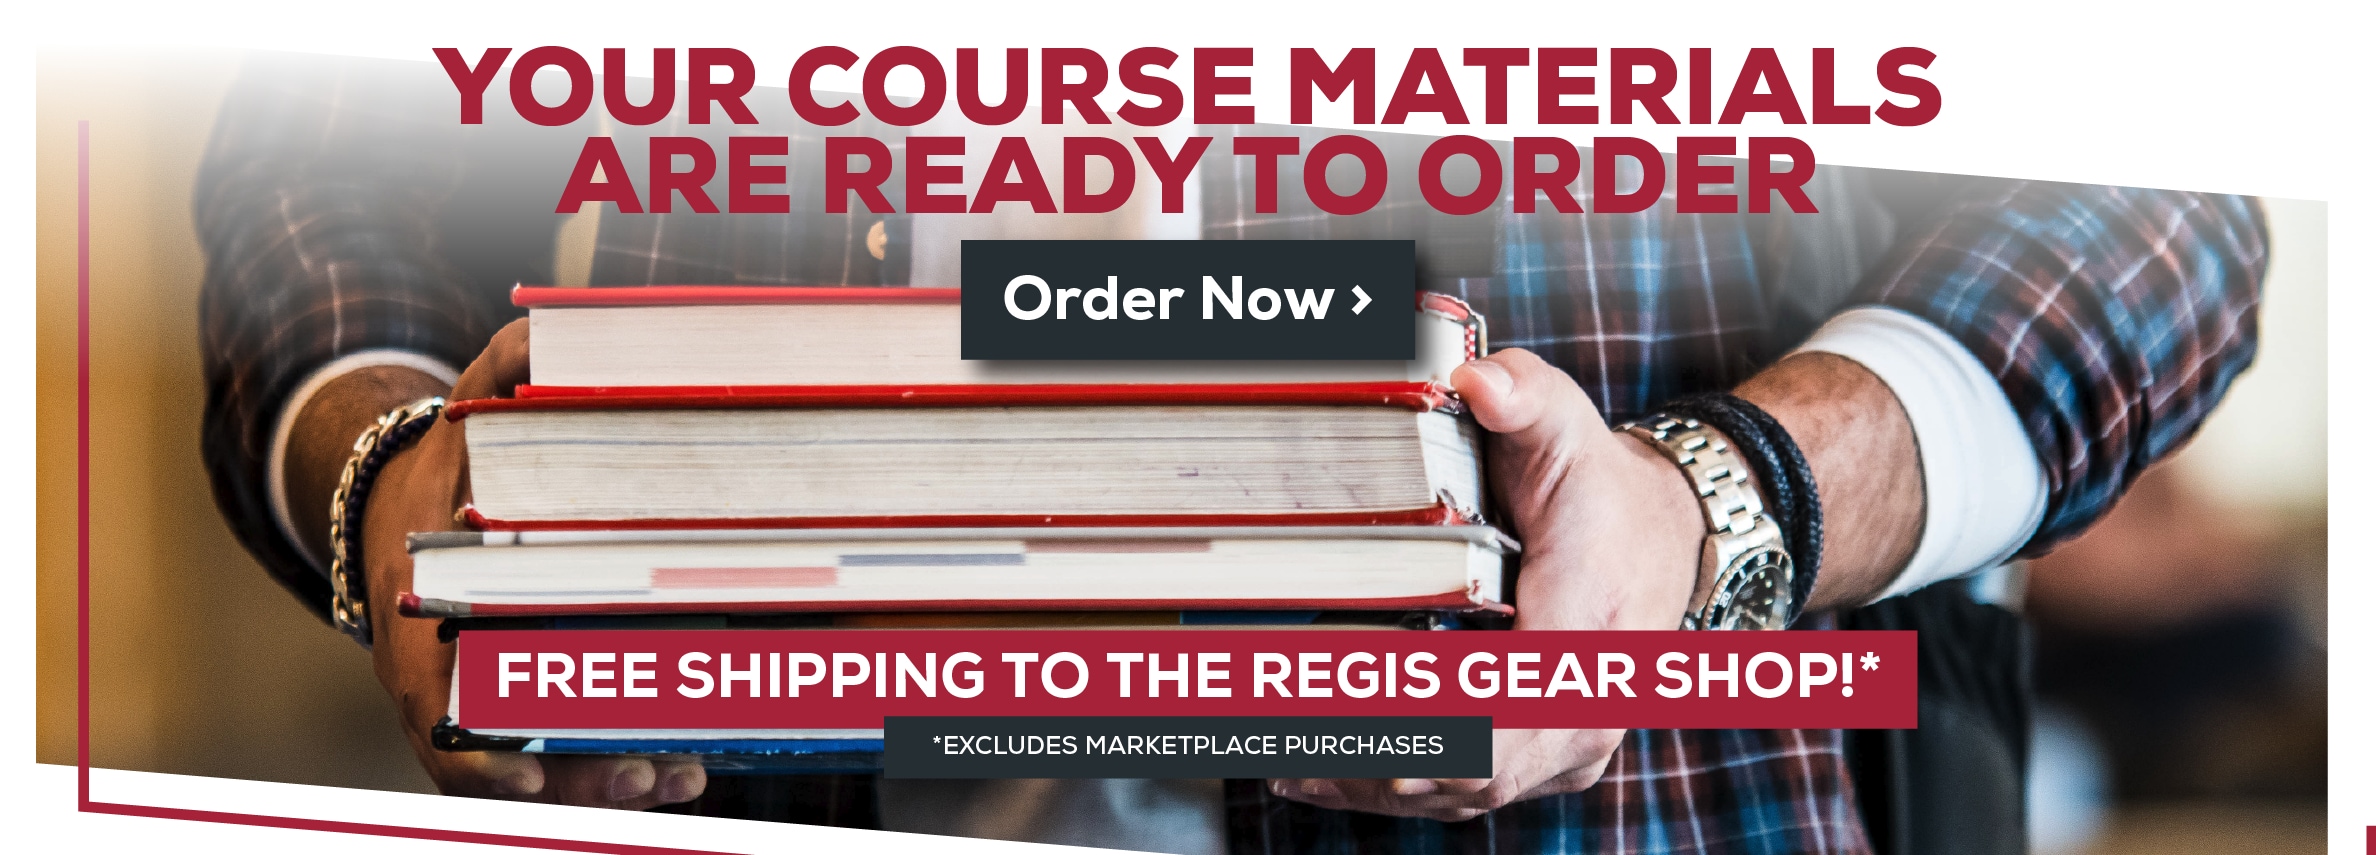 Your Course Materials are Ready to Order. Order Now. Free shipping to the Regis Gear Shop! *Excludes marketplace purchases.